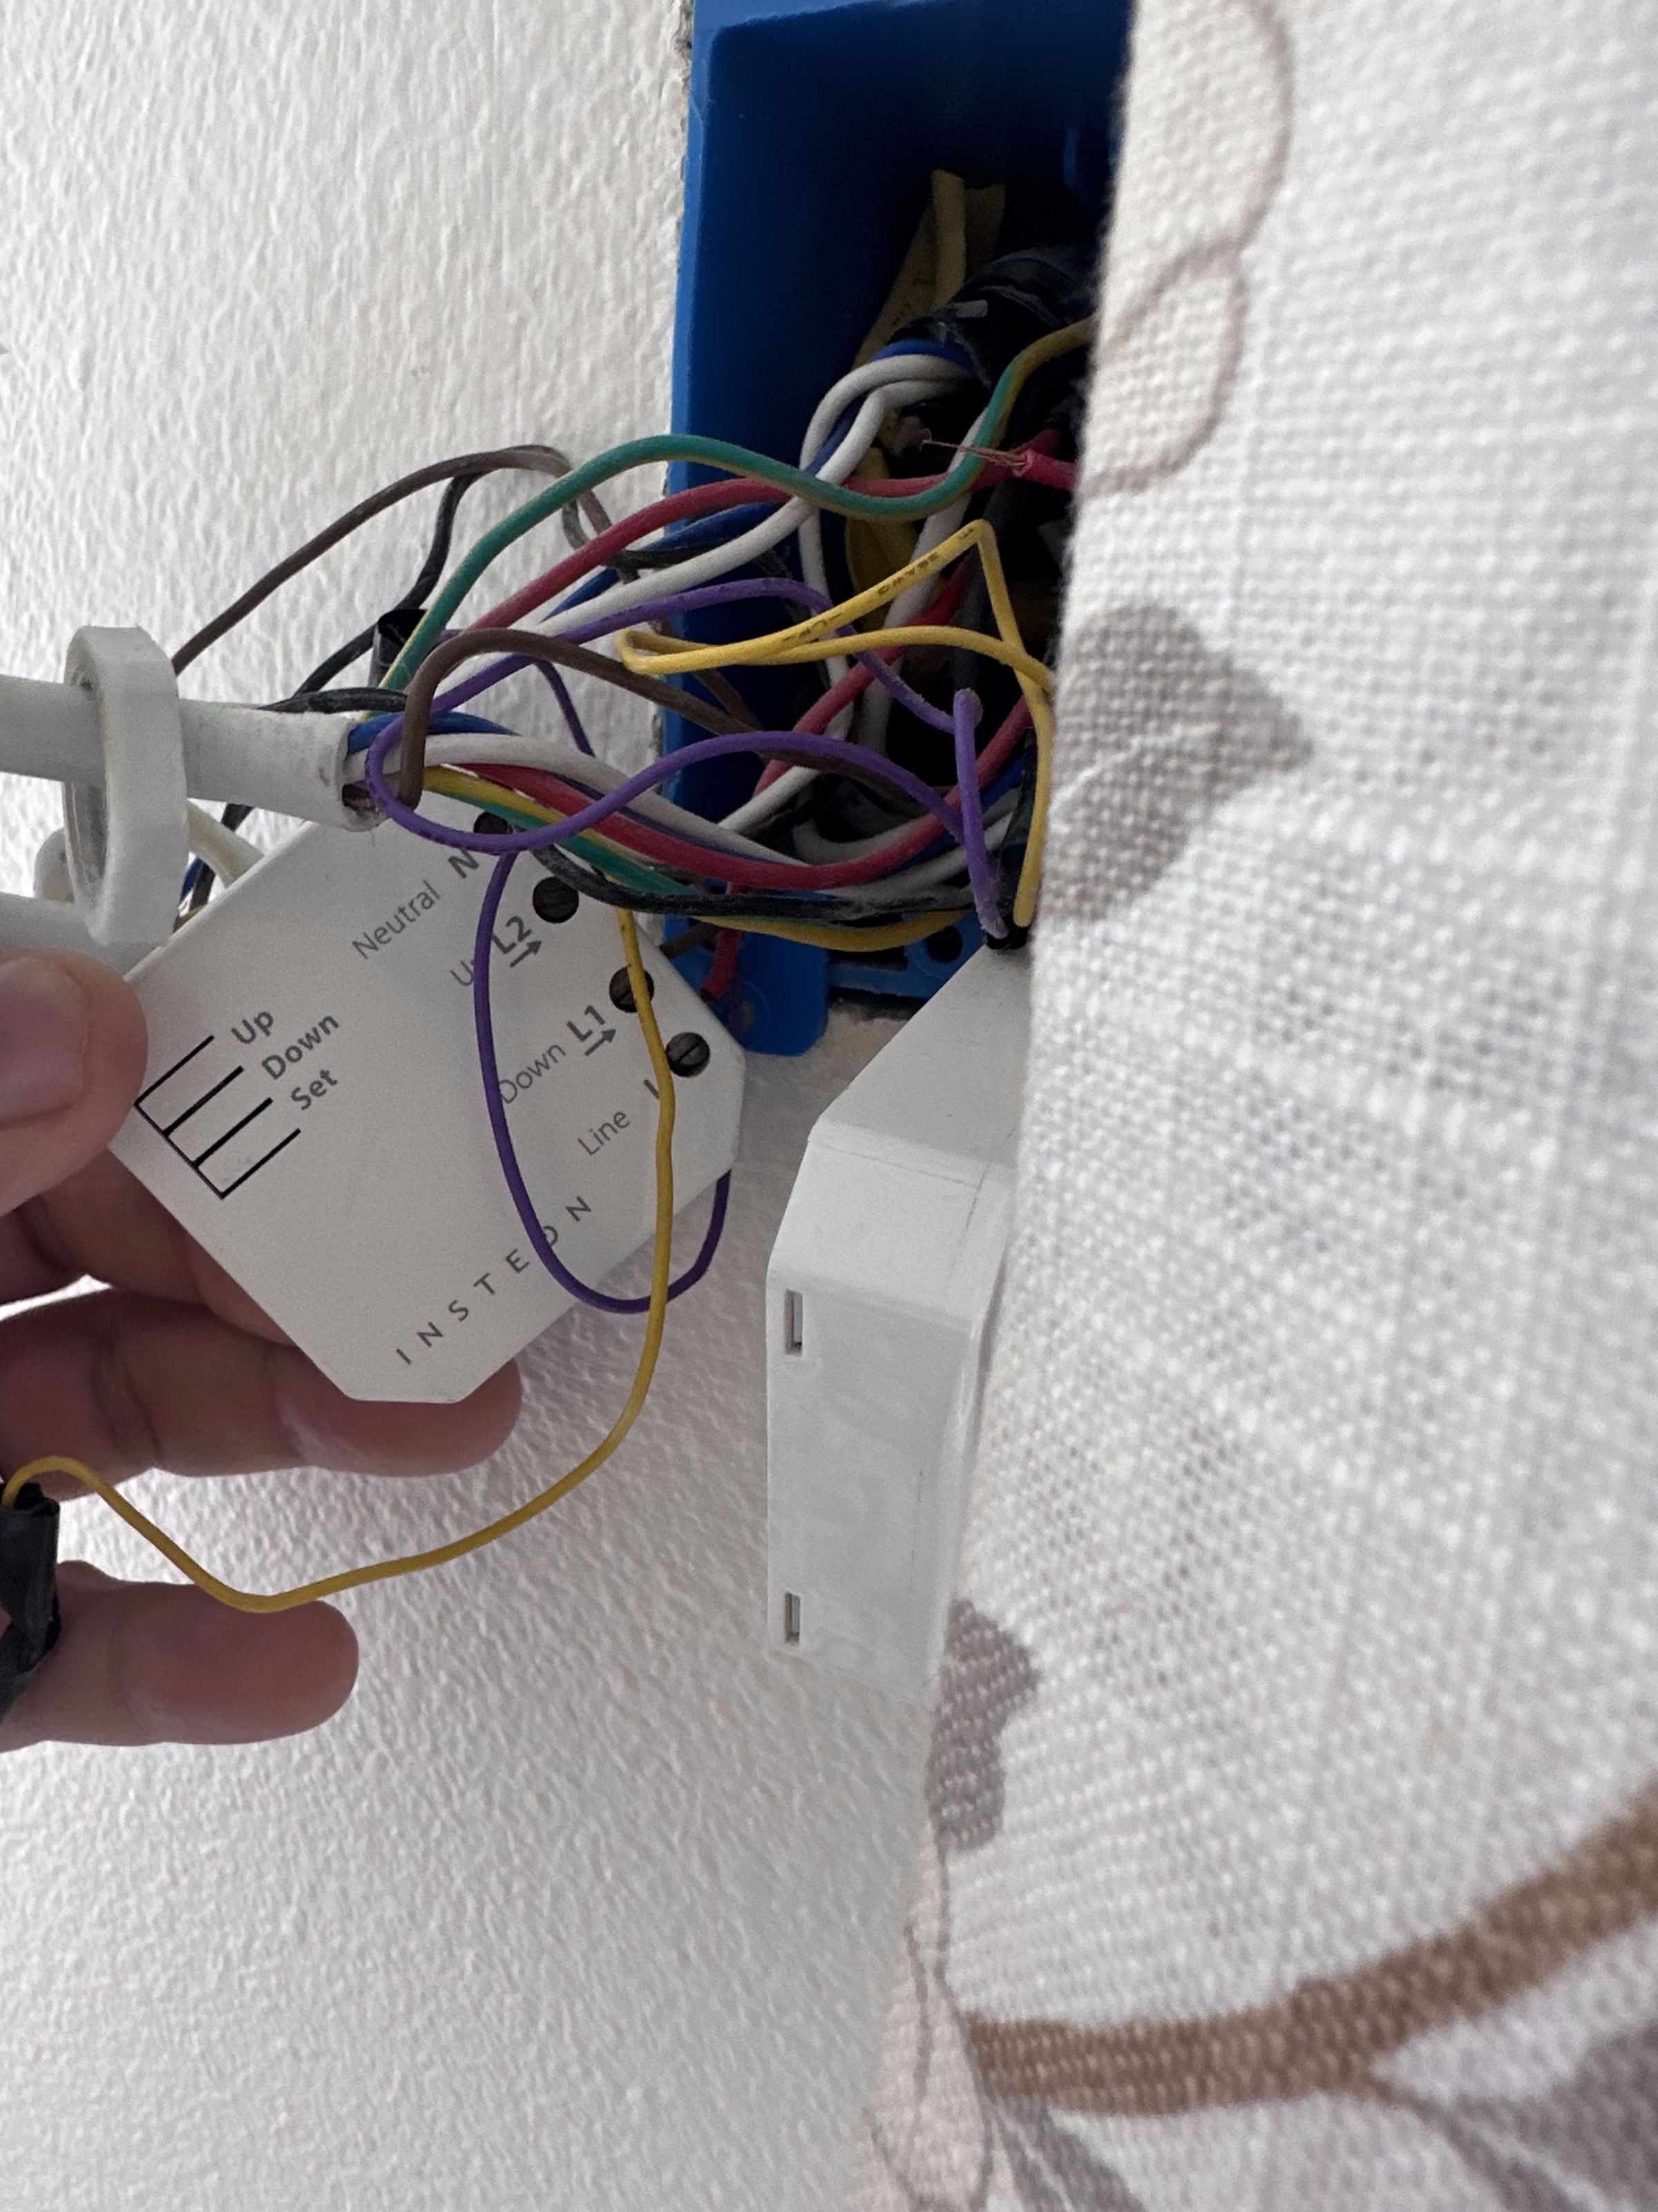 A close-up of a small white box with multiple colored wires coming out of it. The Insteon logo is very apparent.